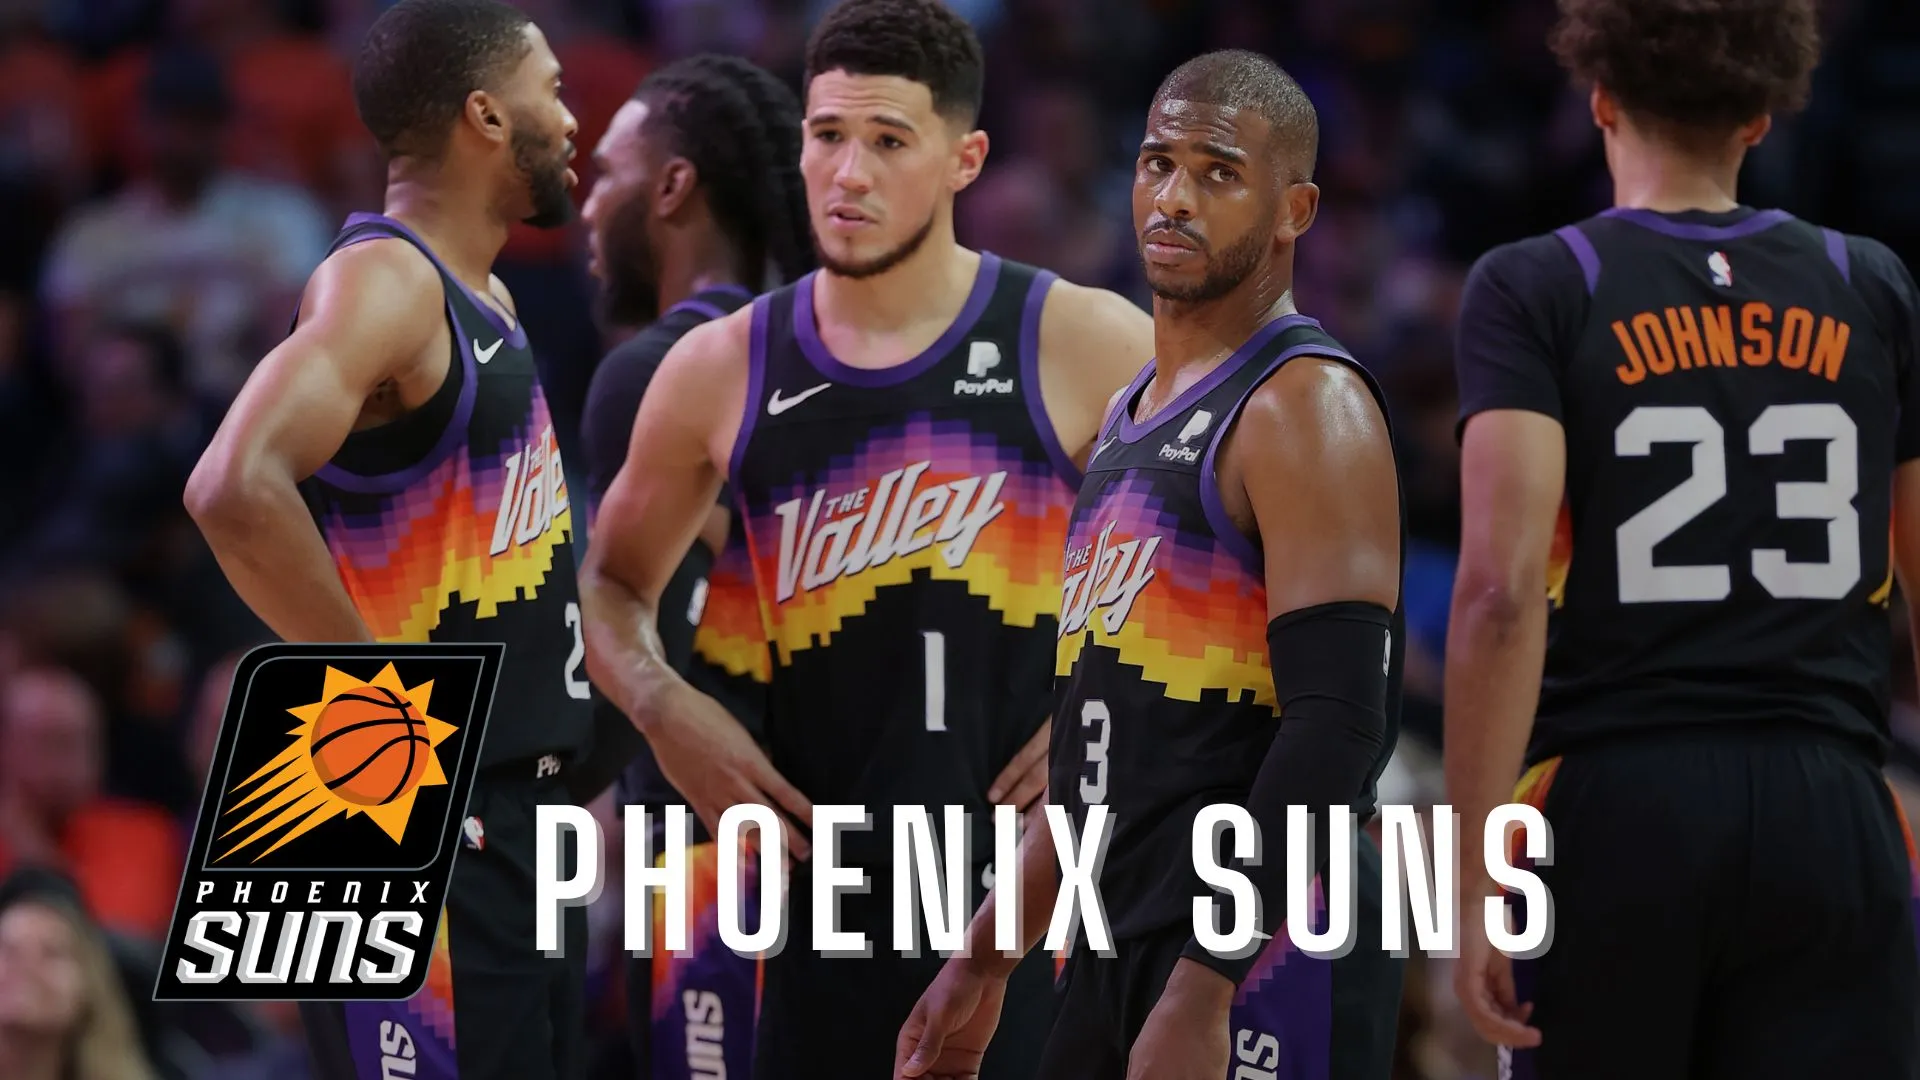 Who is the Owner of the Phoenix Suns?